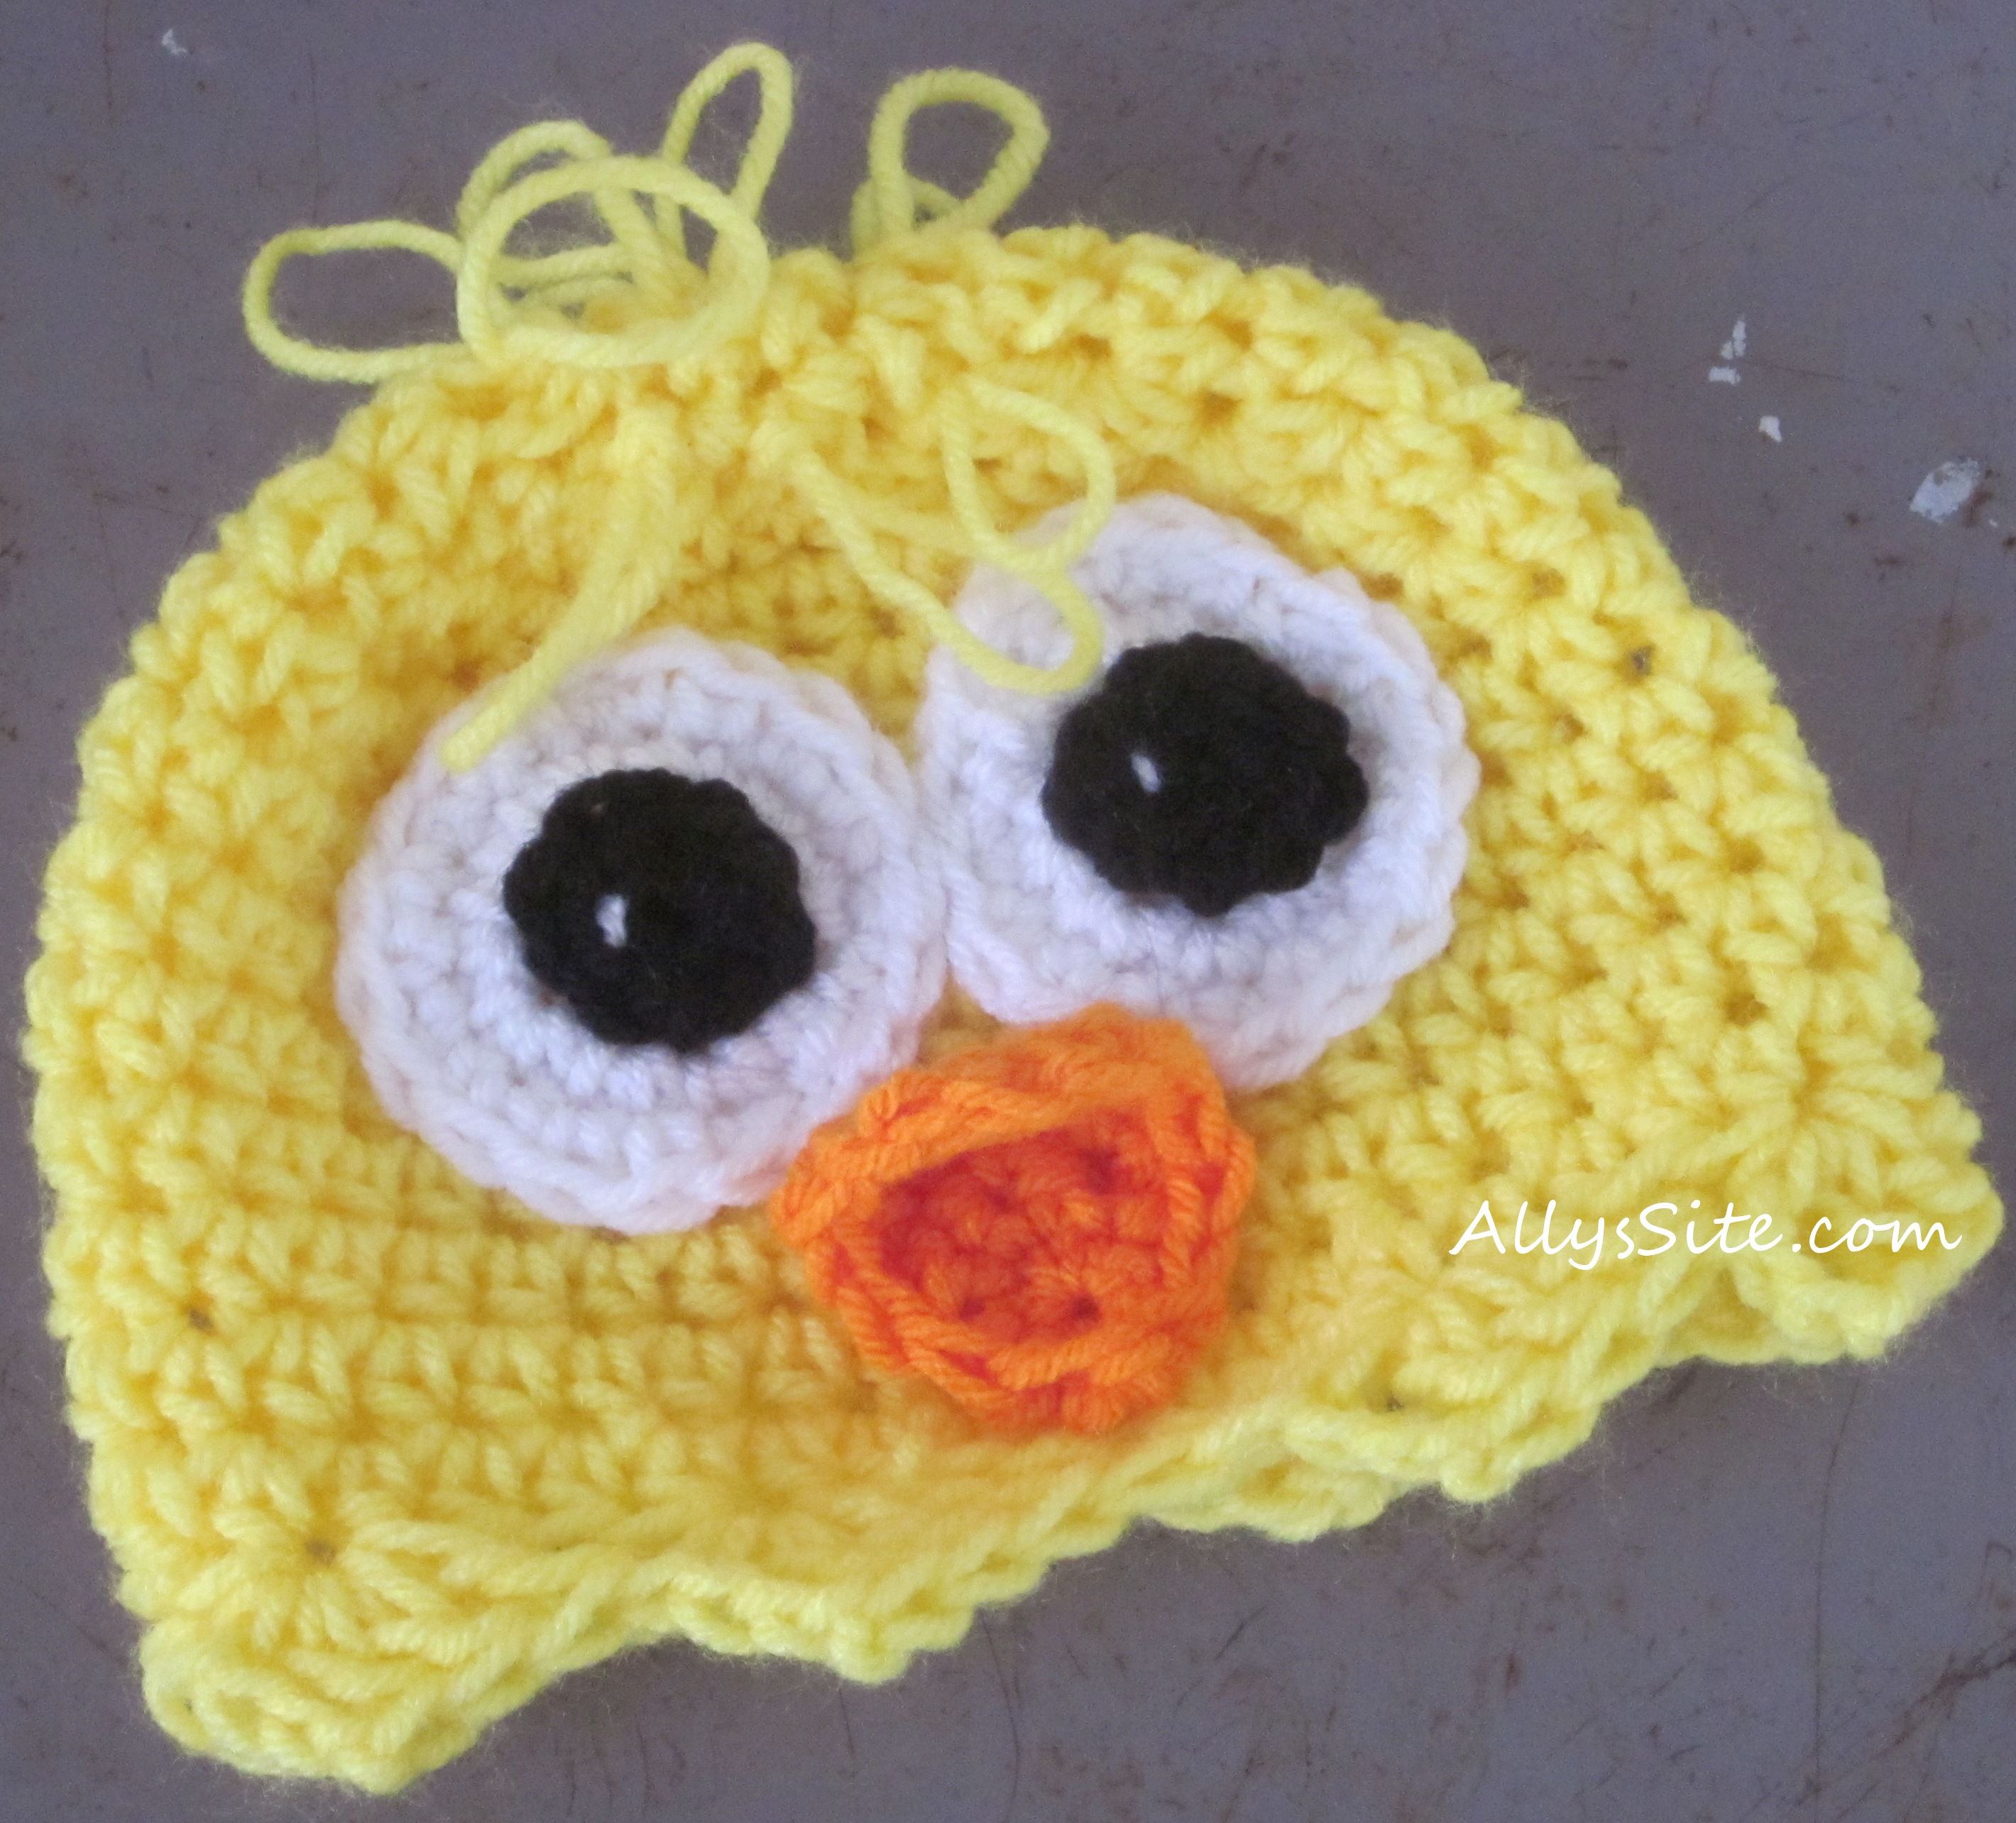 Free Crochet Baby Hats Patterns Easy Animal Hat Patterns Knitting And Crochet Blog